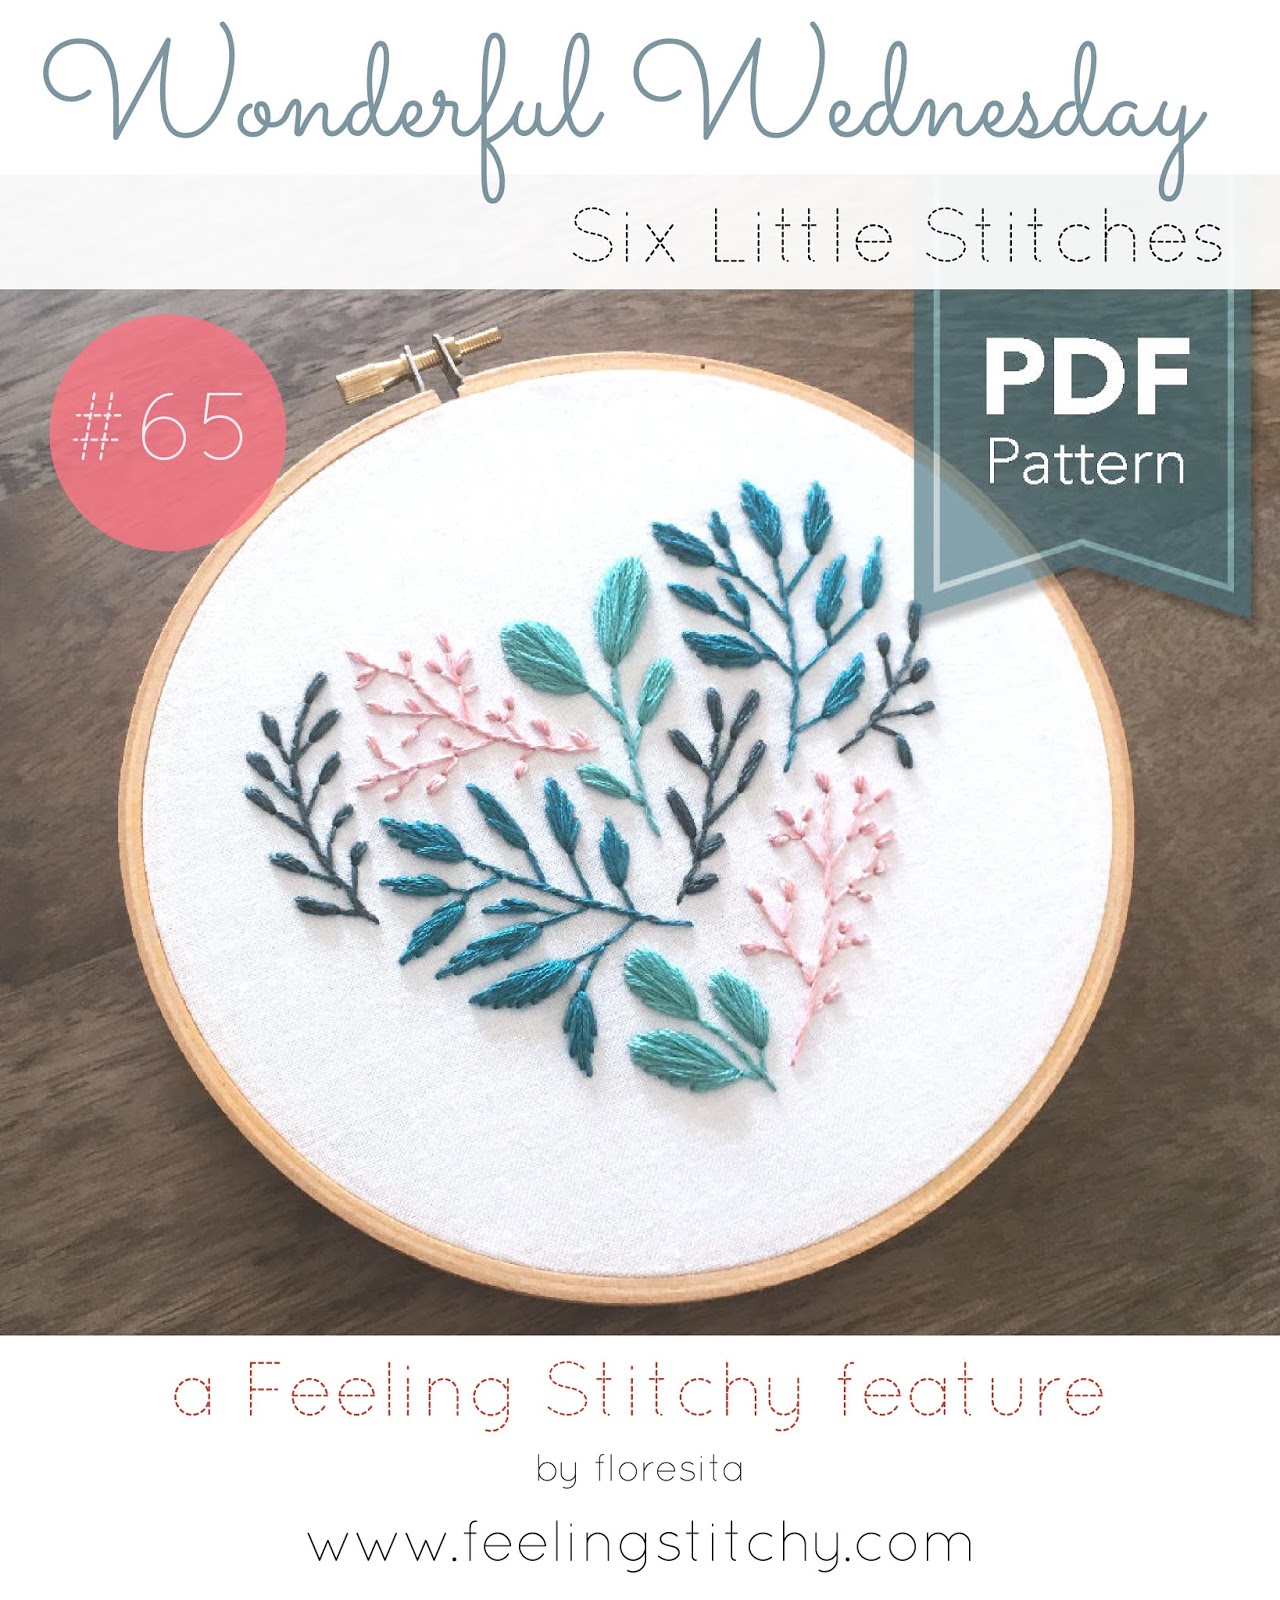 Wonderful Wednesday 65 Six Little Stitches pattern as featured by floresita on Feeling Stitchy